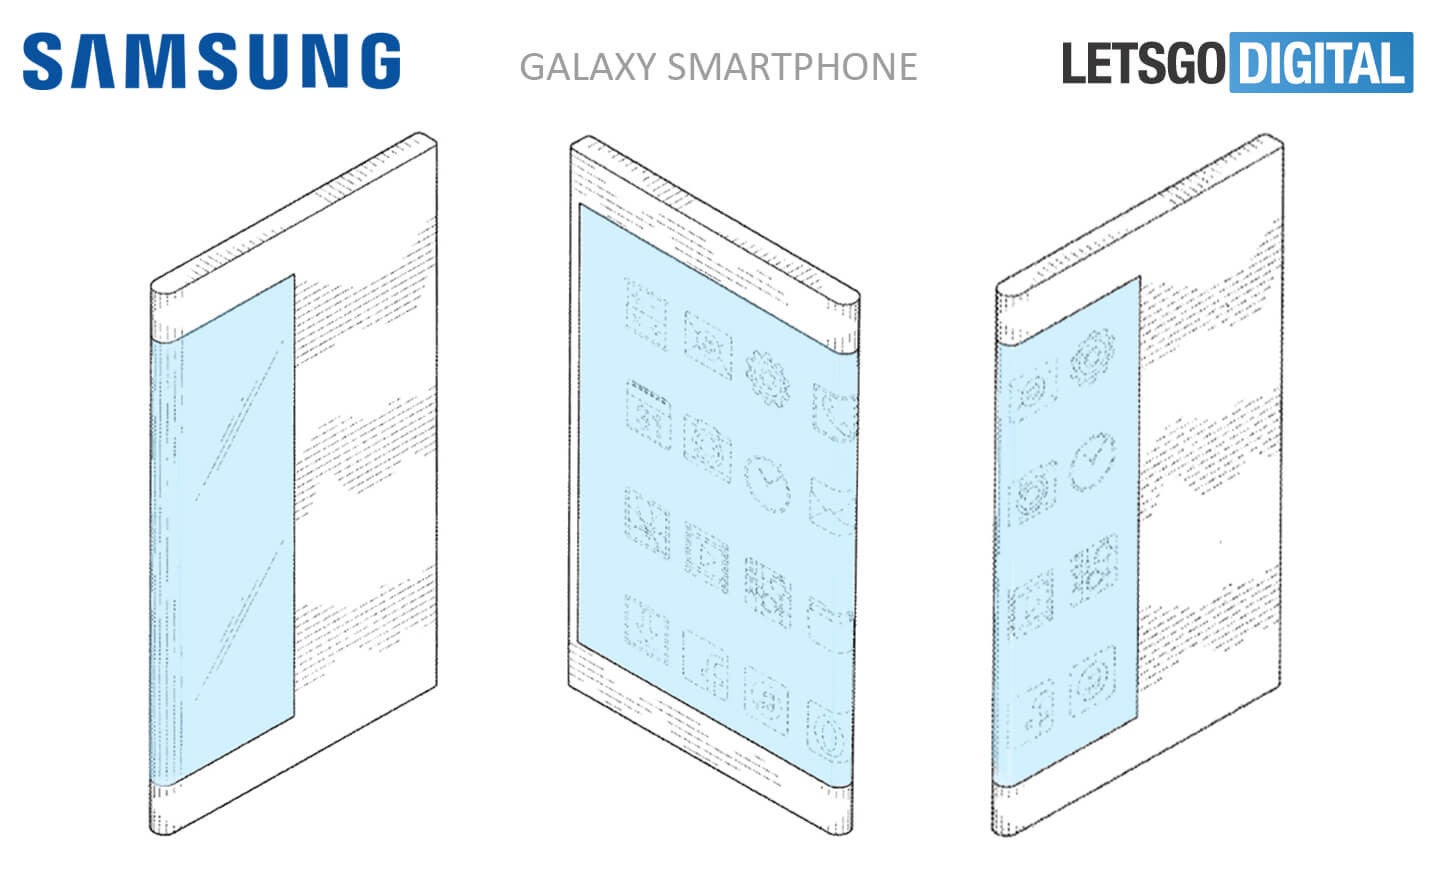 Here is what Samsung's upcoming foldable smartphone may look like